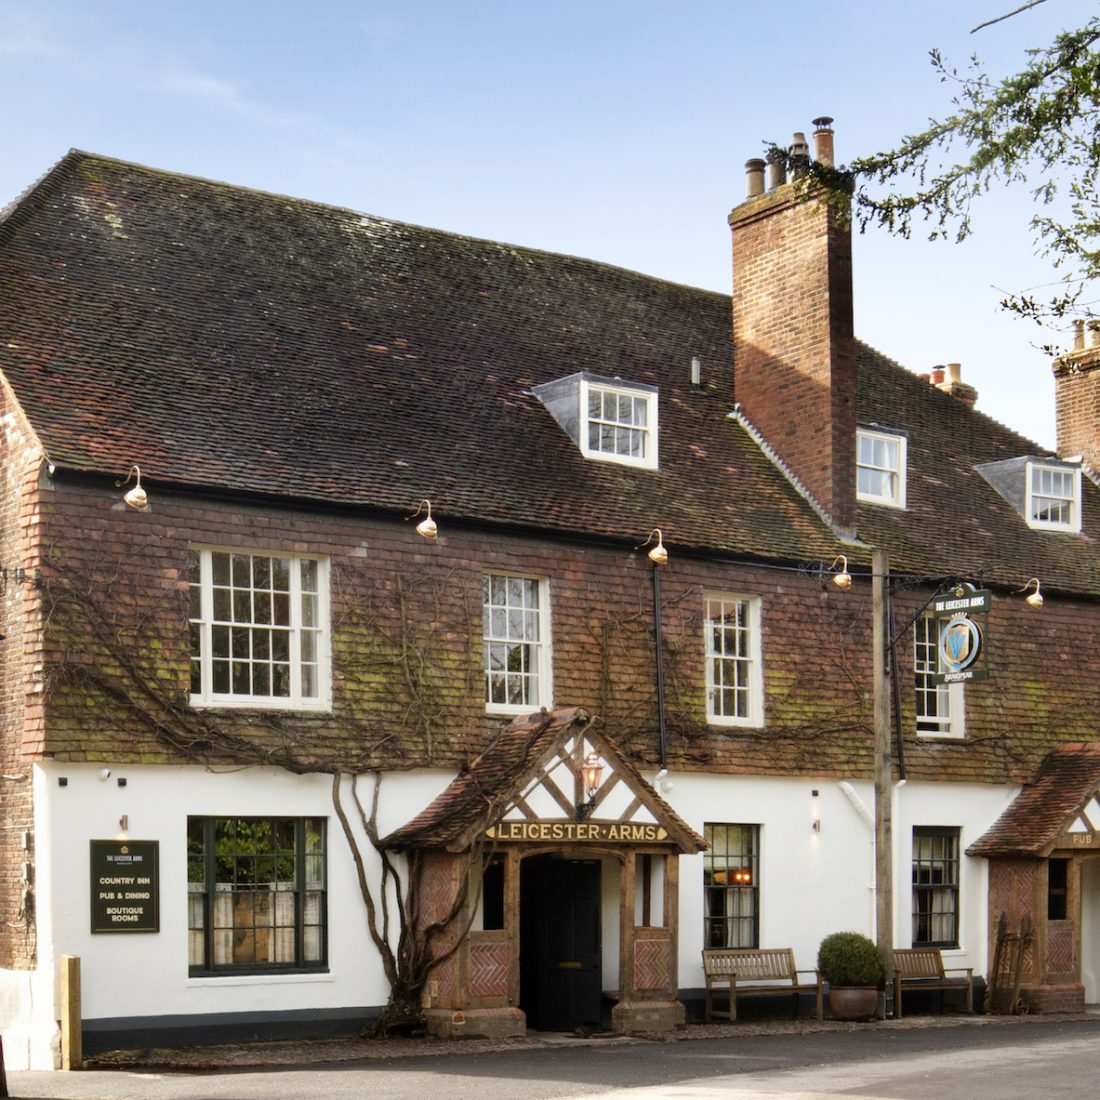 The Leicester Arms, Penshurst